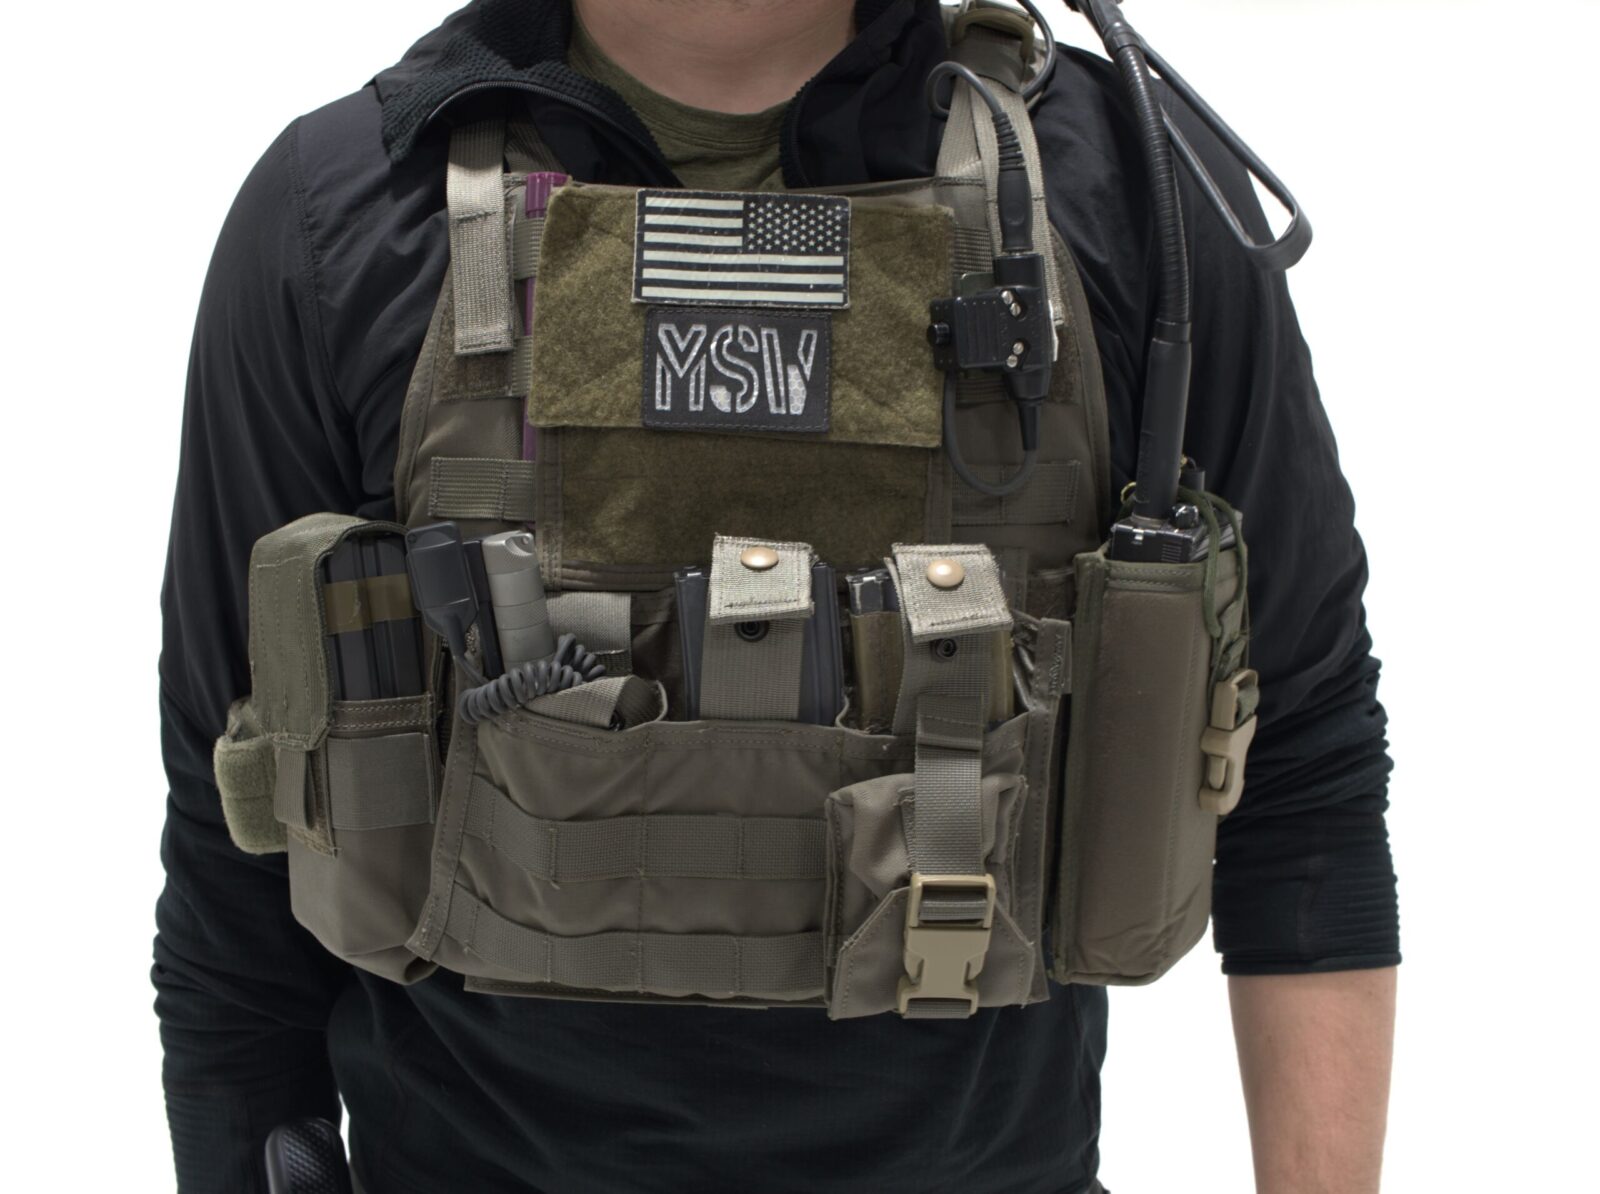 MBAV and Pouch Tactical Bundle - L.A.R.P. Tactical